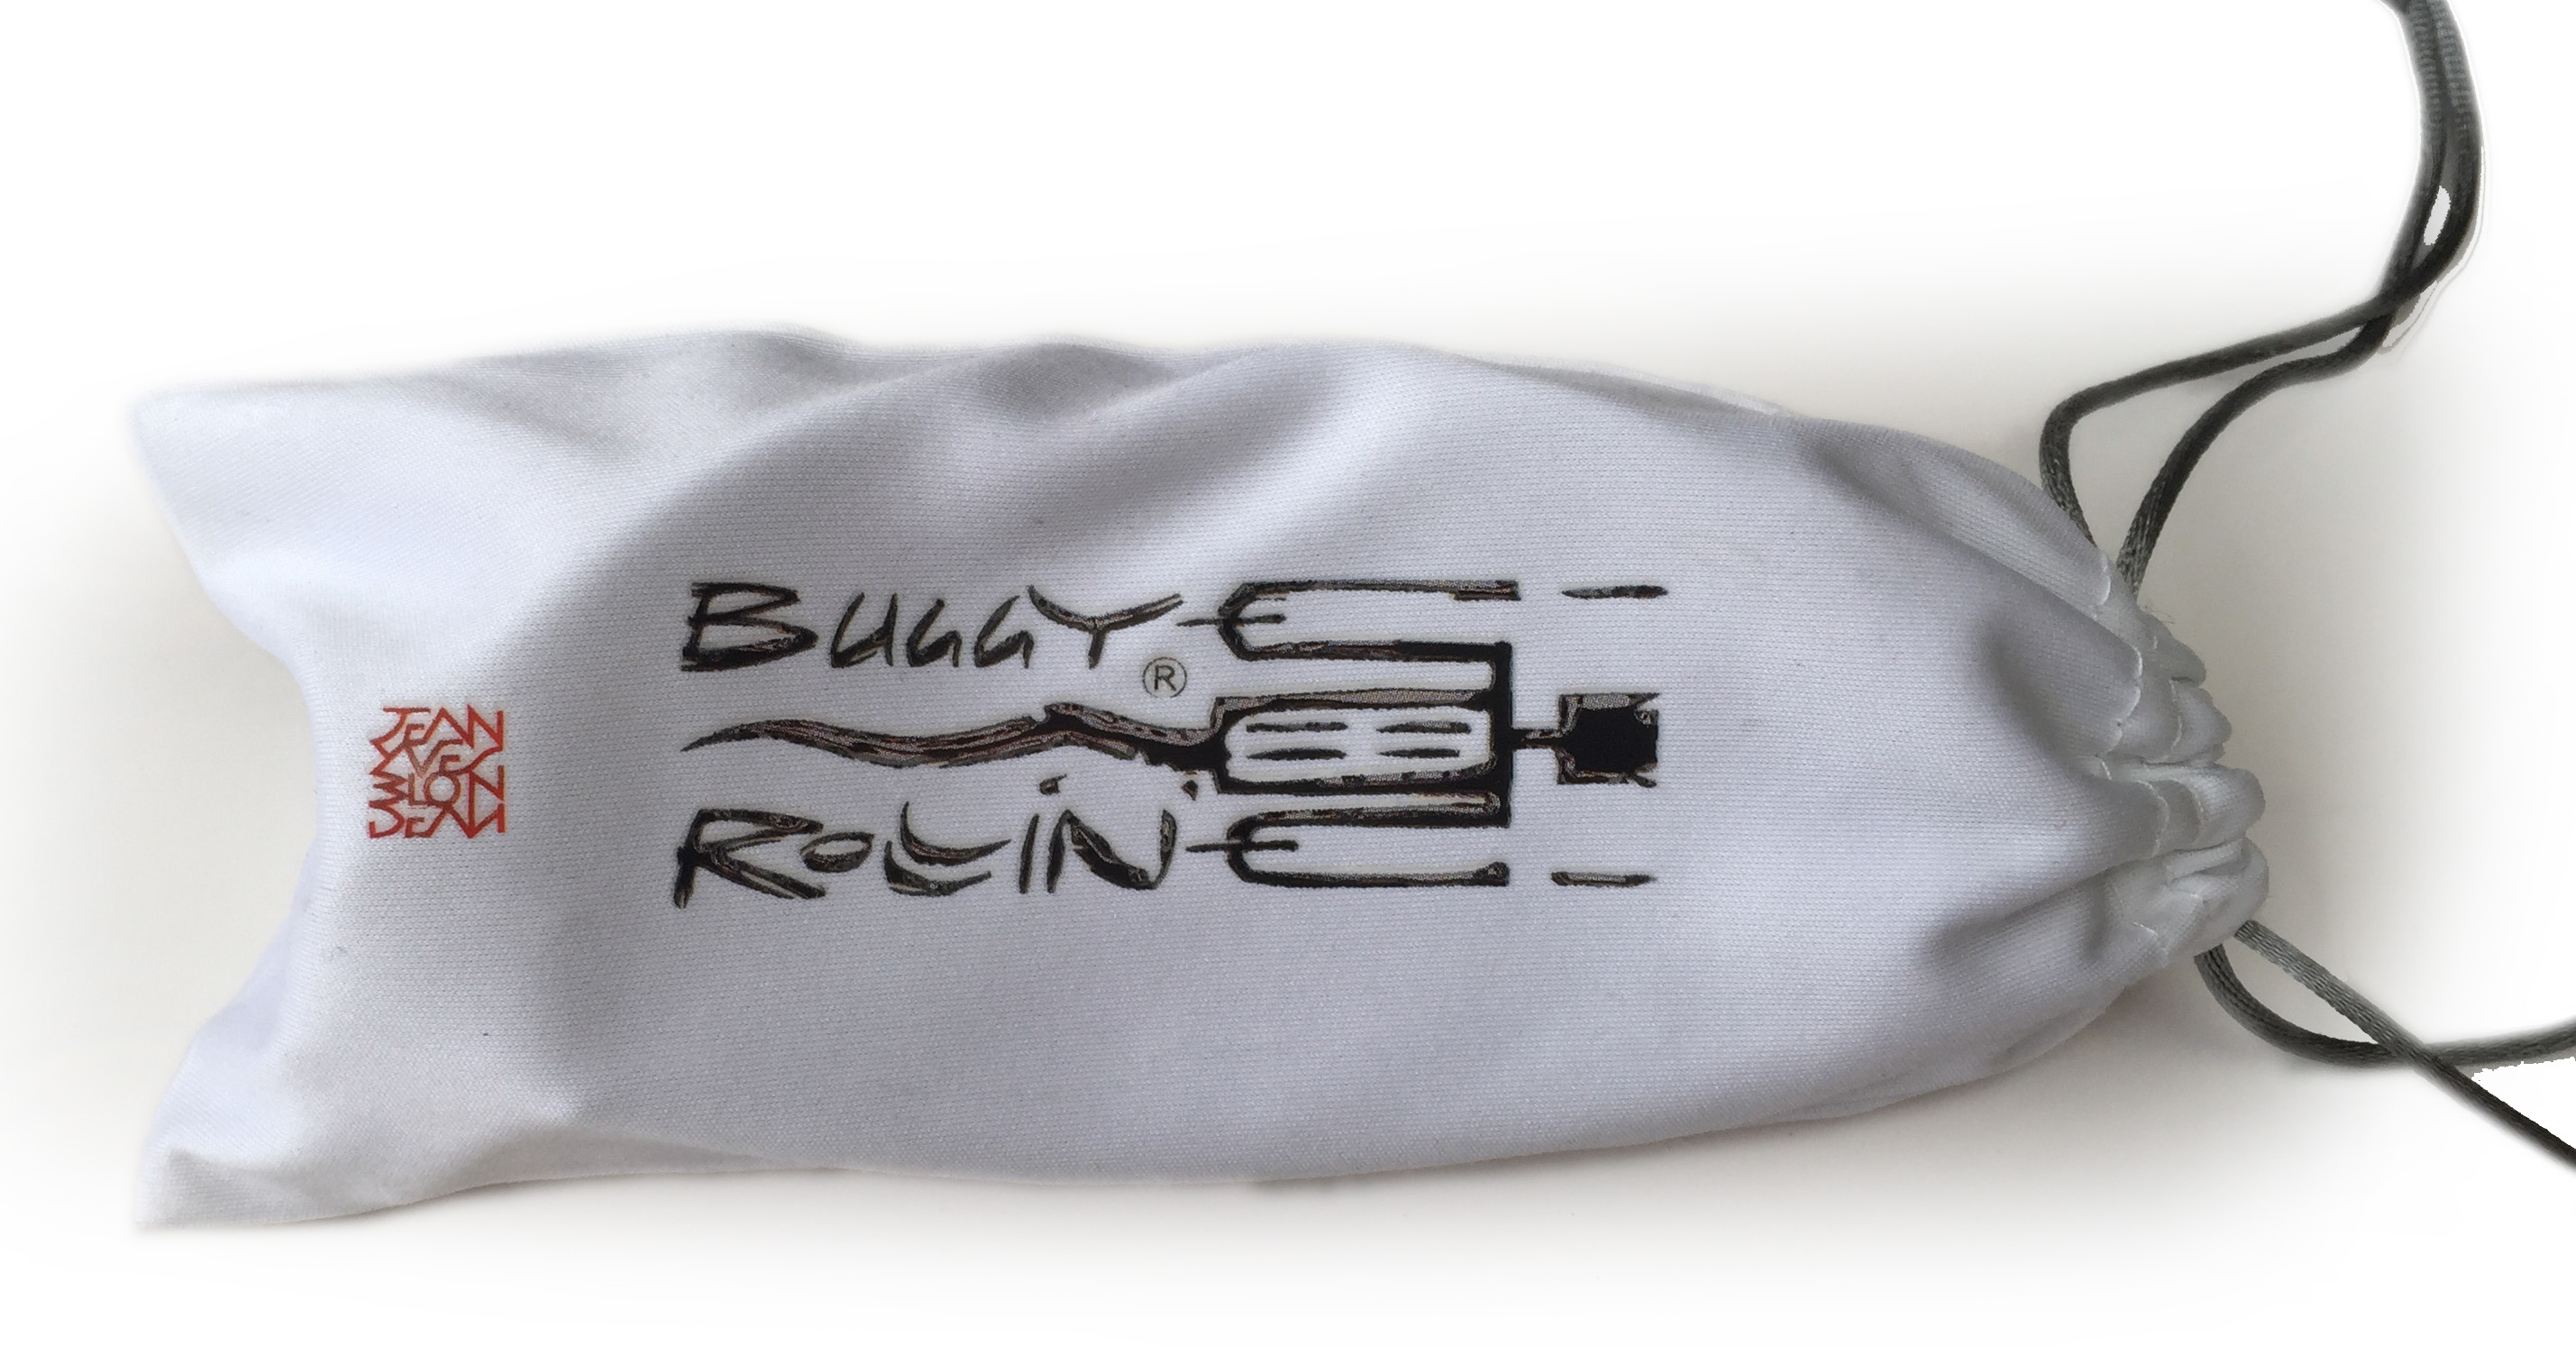 pocket house of buggy rollin sun glasses branded with black liquid buggy rollin logo designed by Jean Yves Blondeau